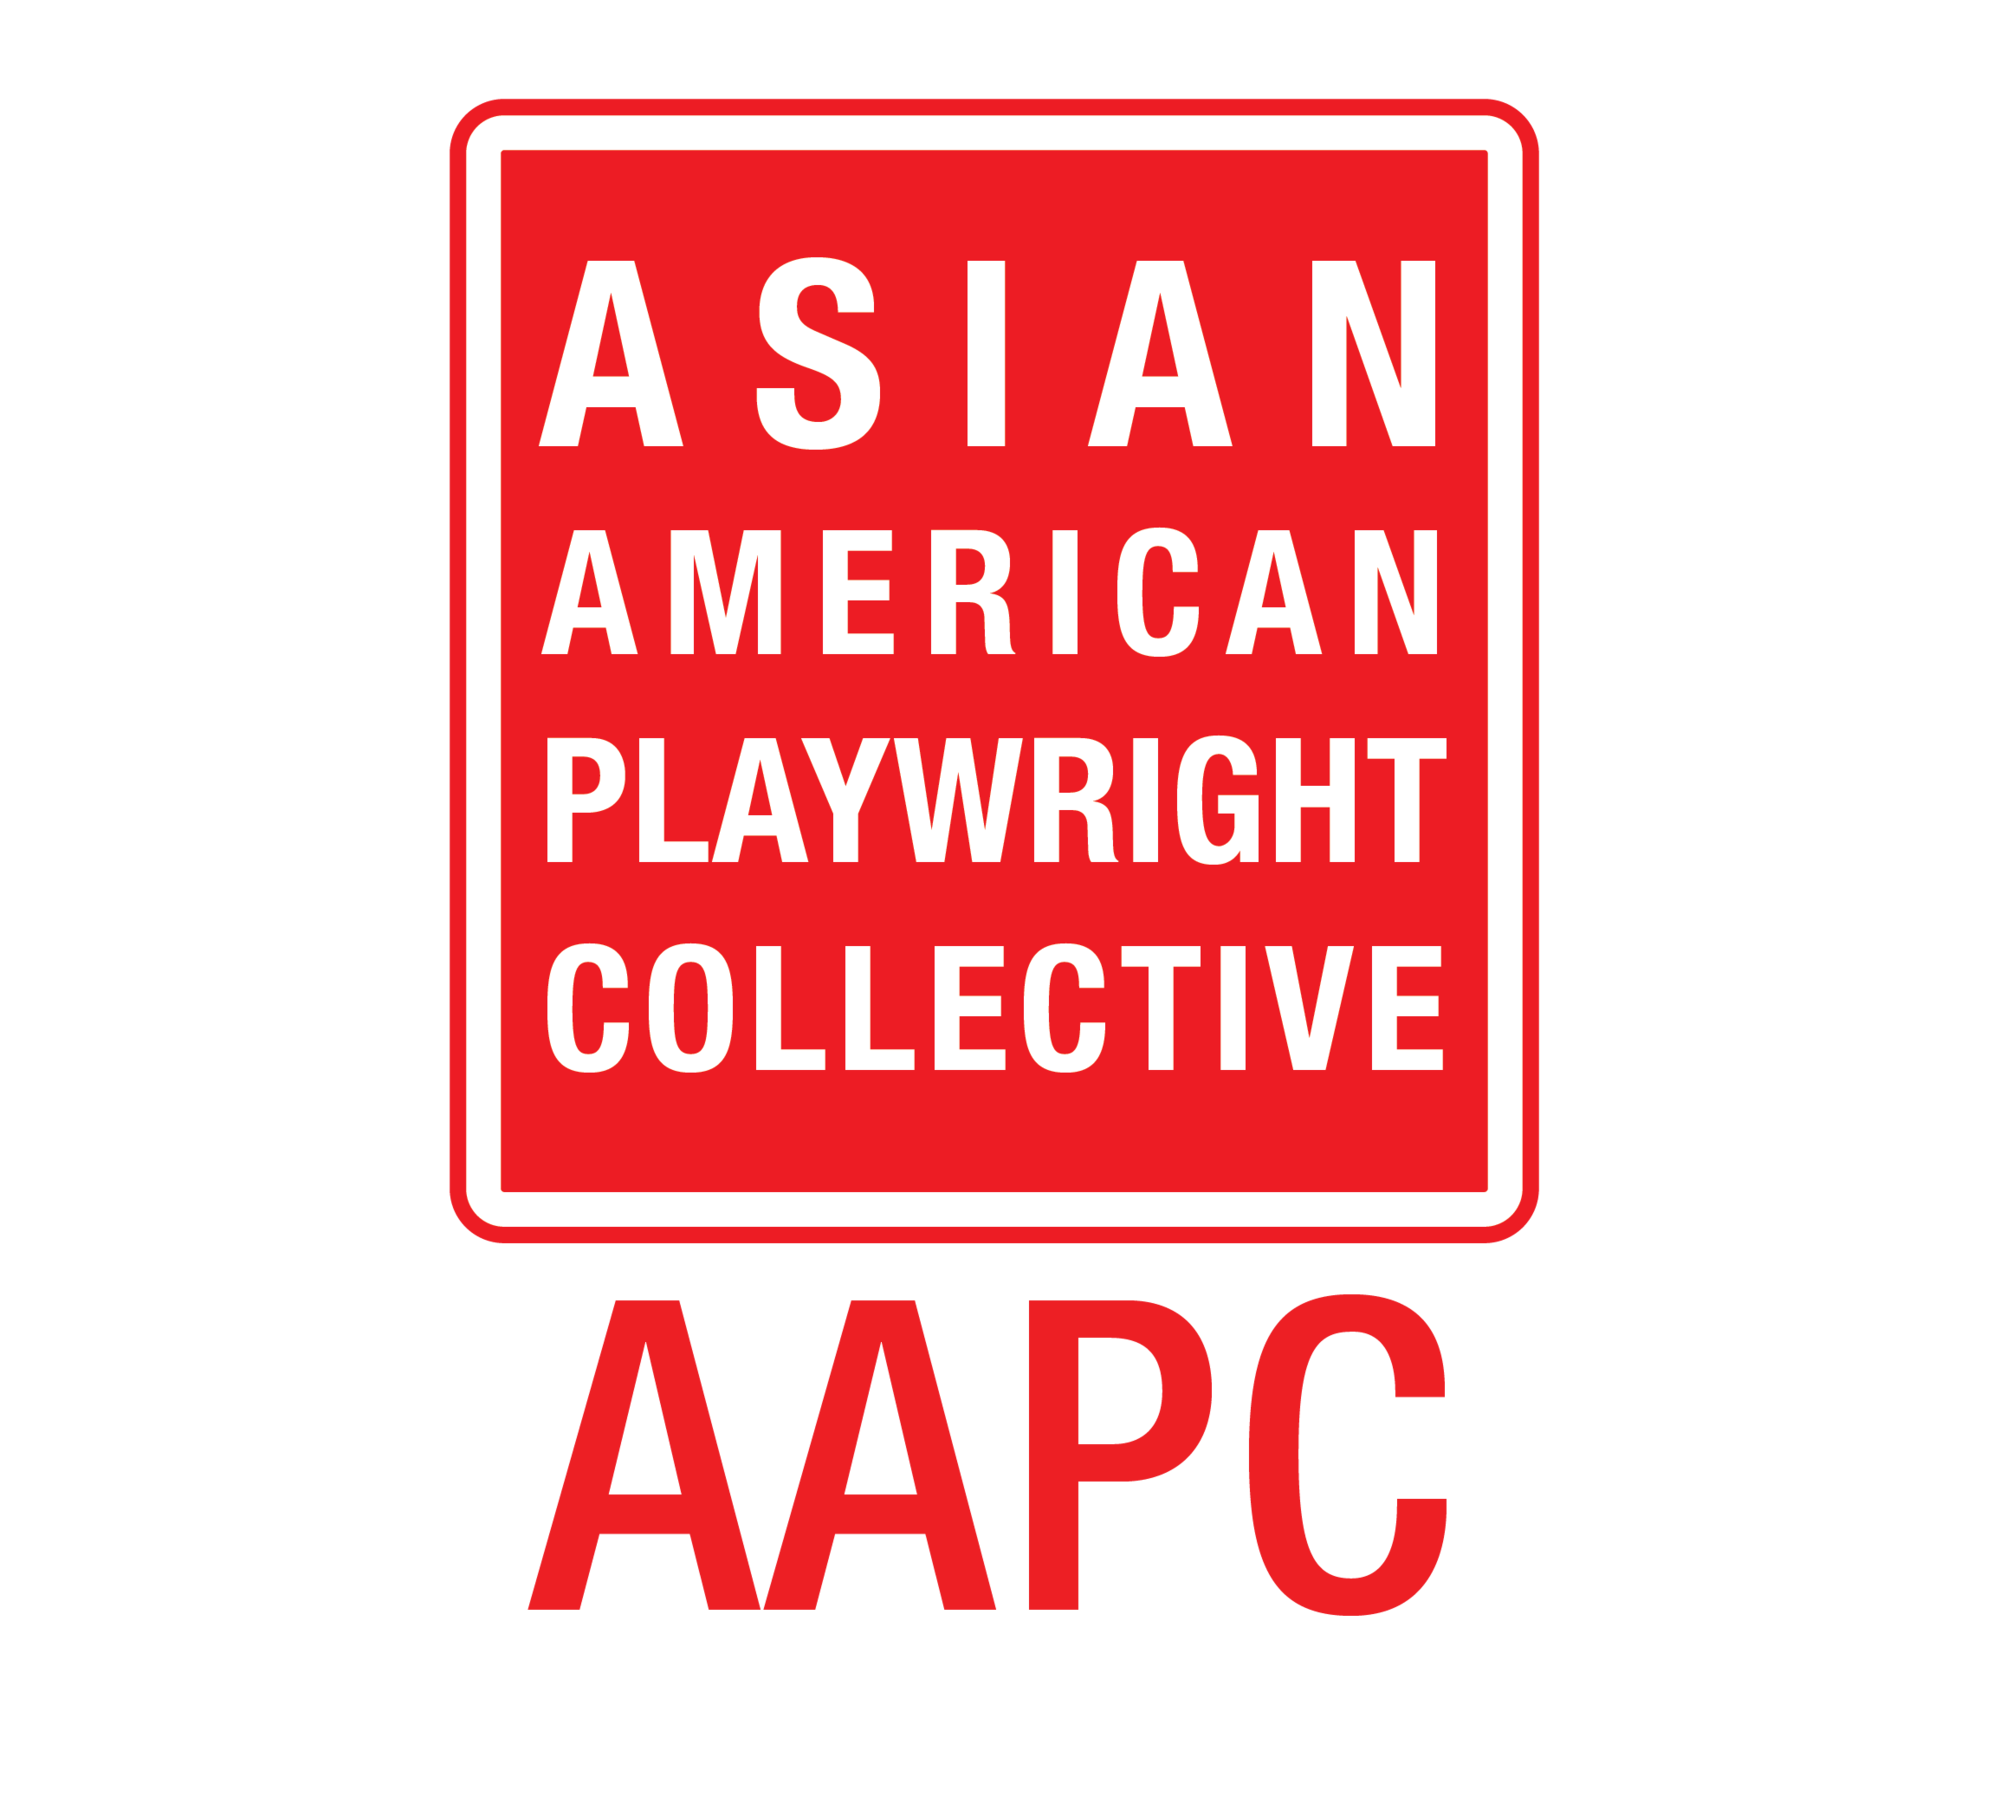 text: Asian American Playwright Collective, AAPC